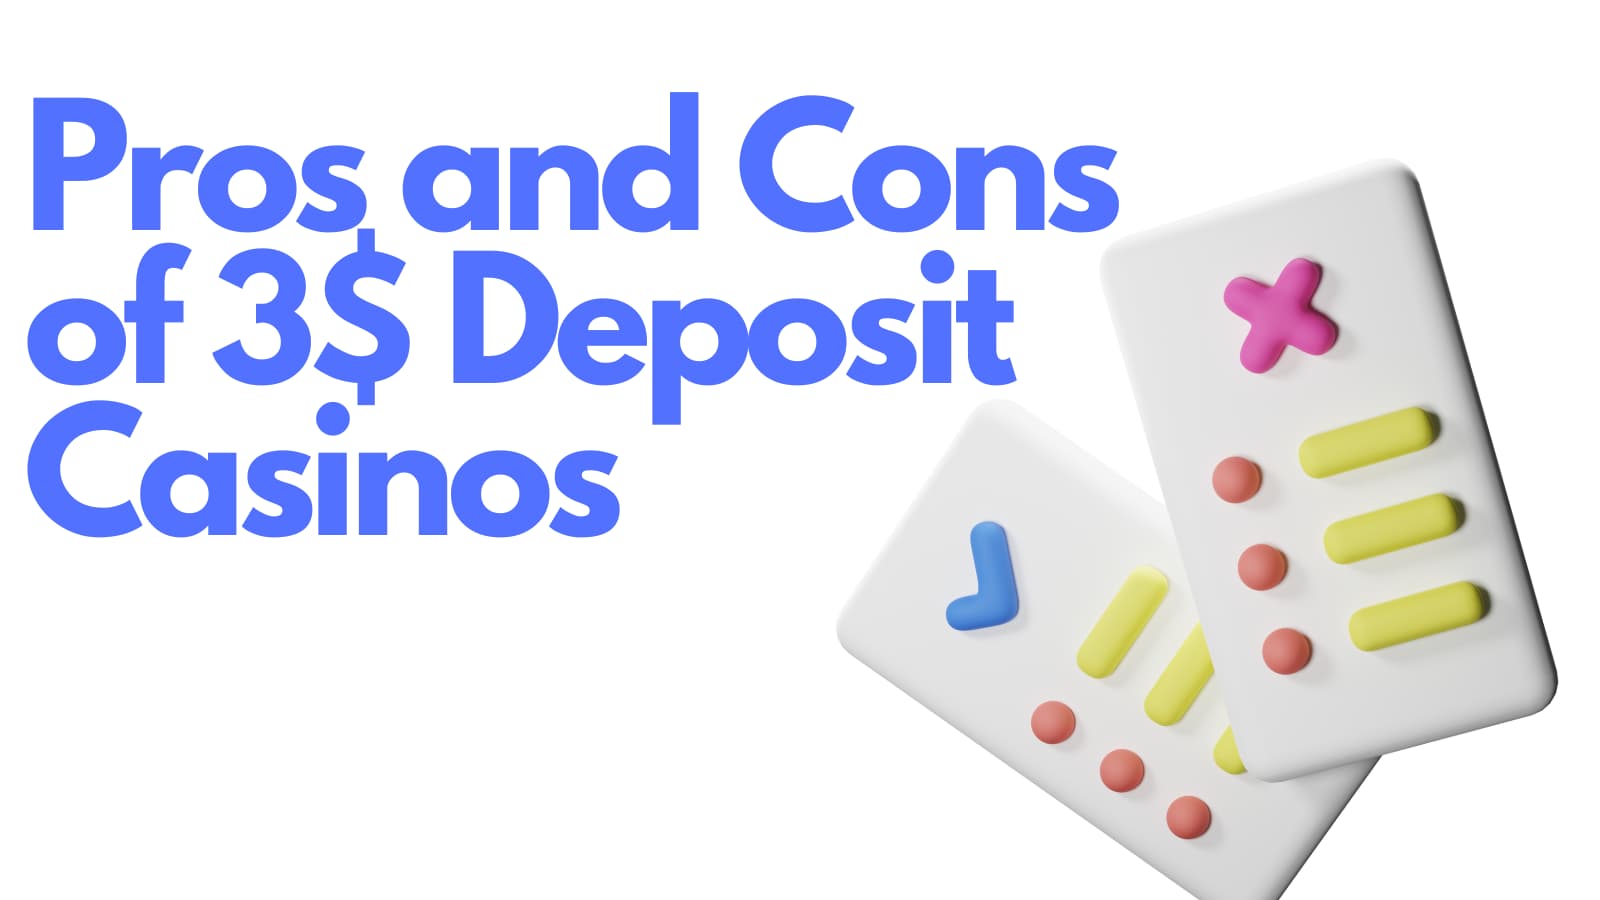 pros and cons of 3$ deposit casinos